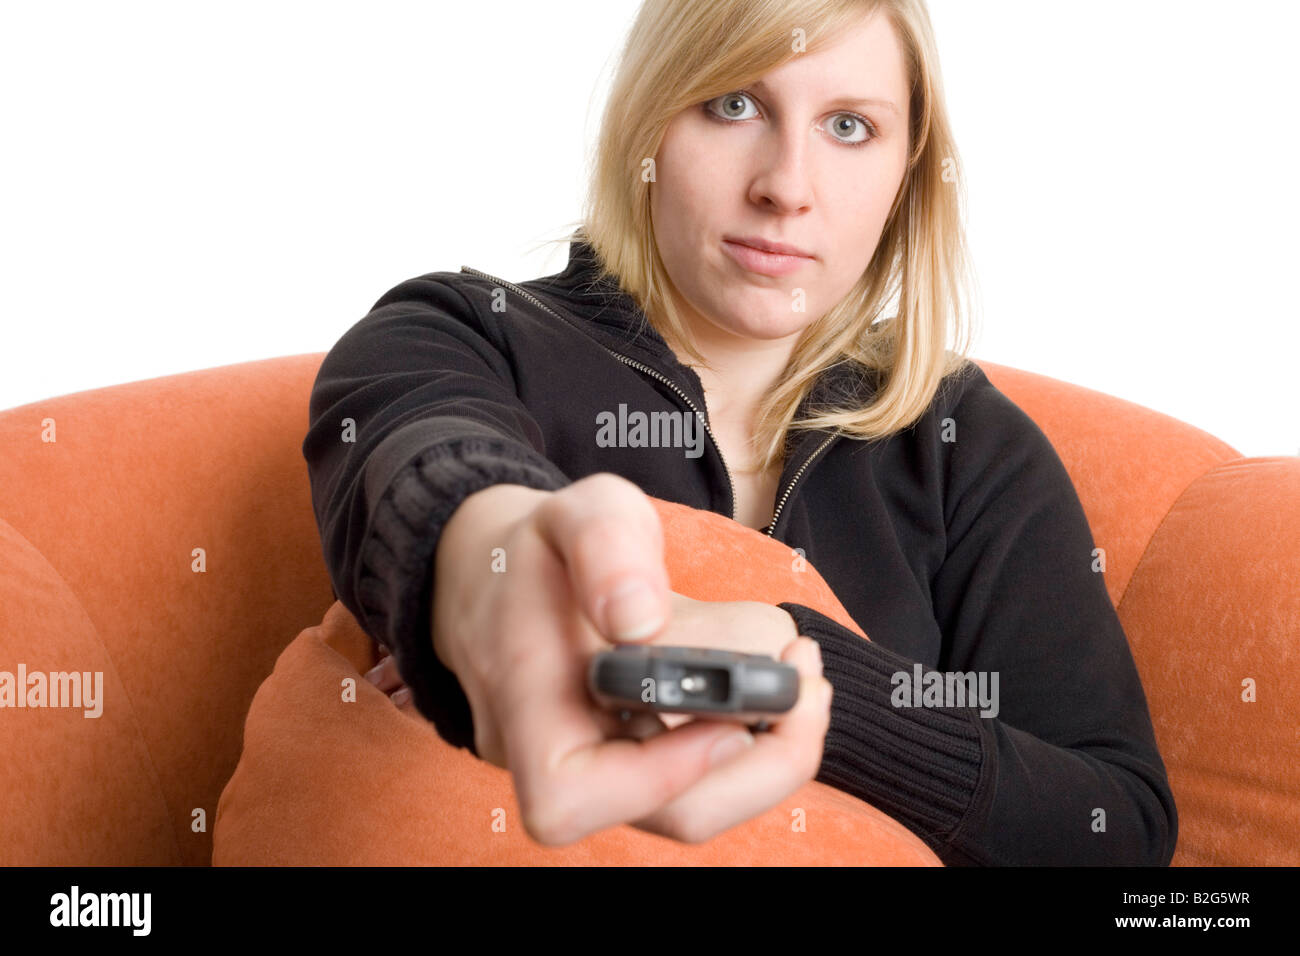 tv remote control shifting chanel surfing Stock Photo